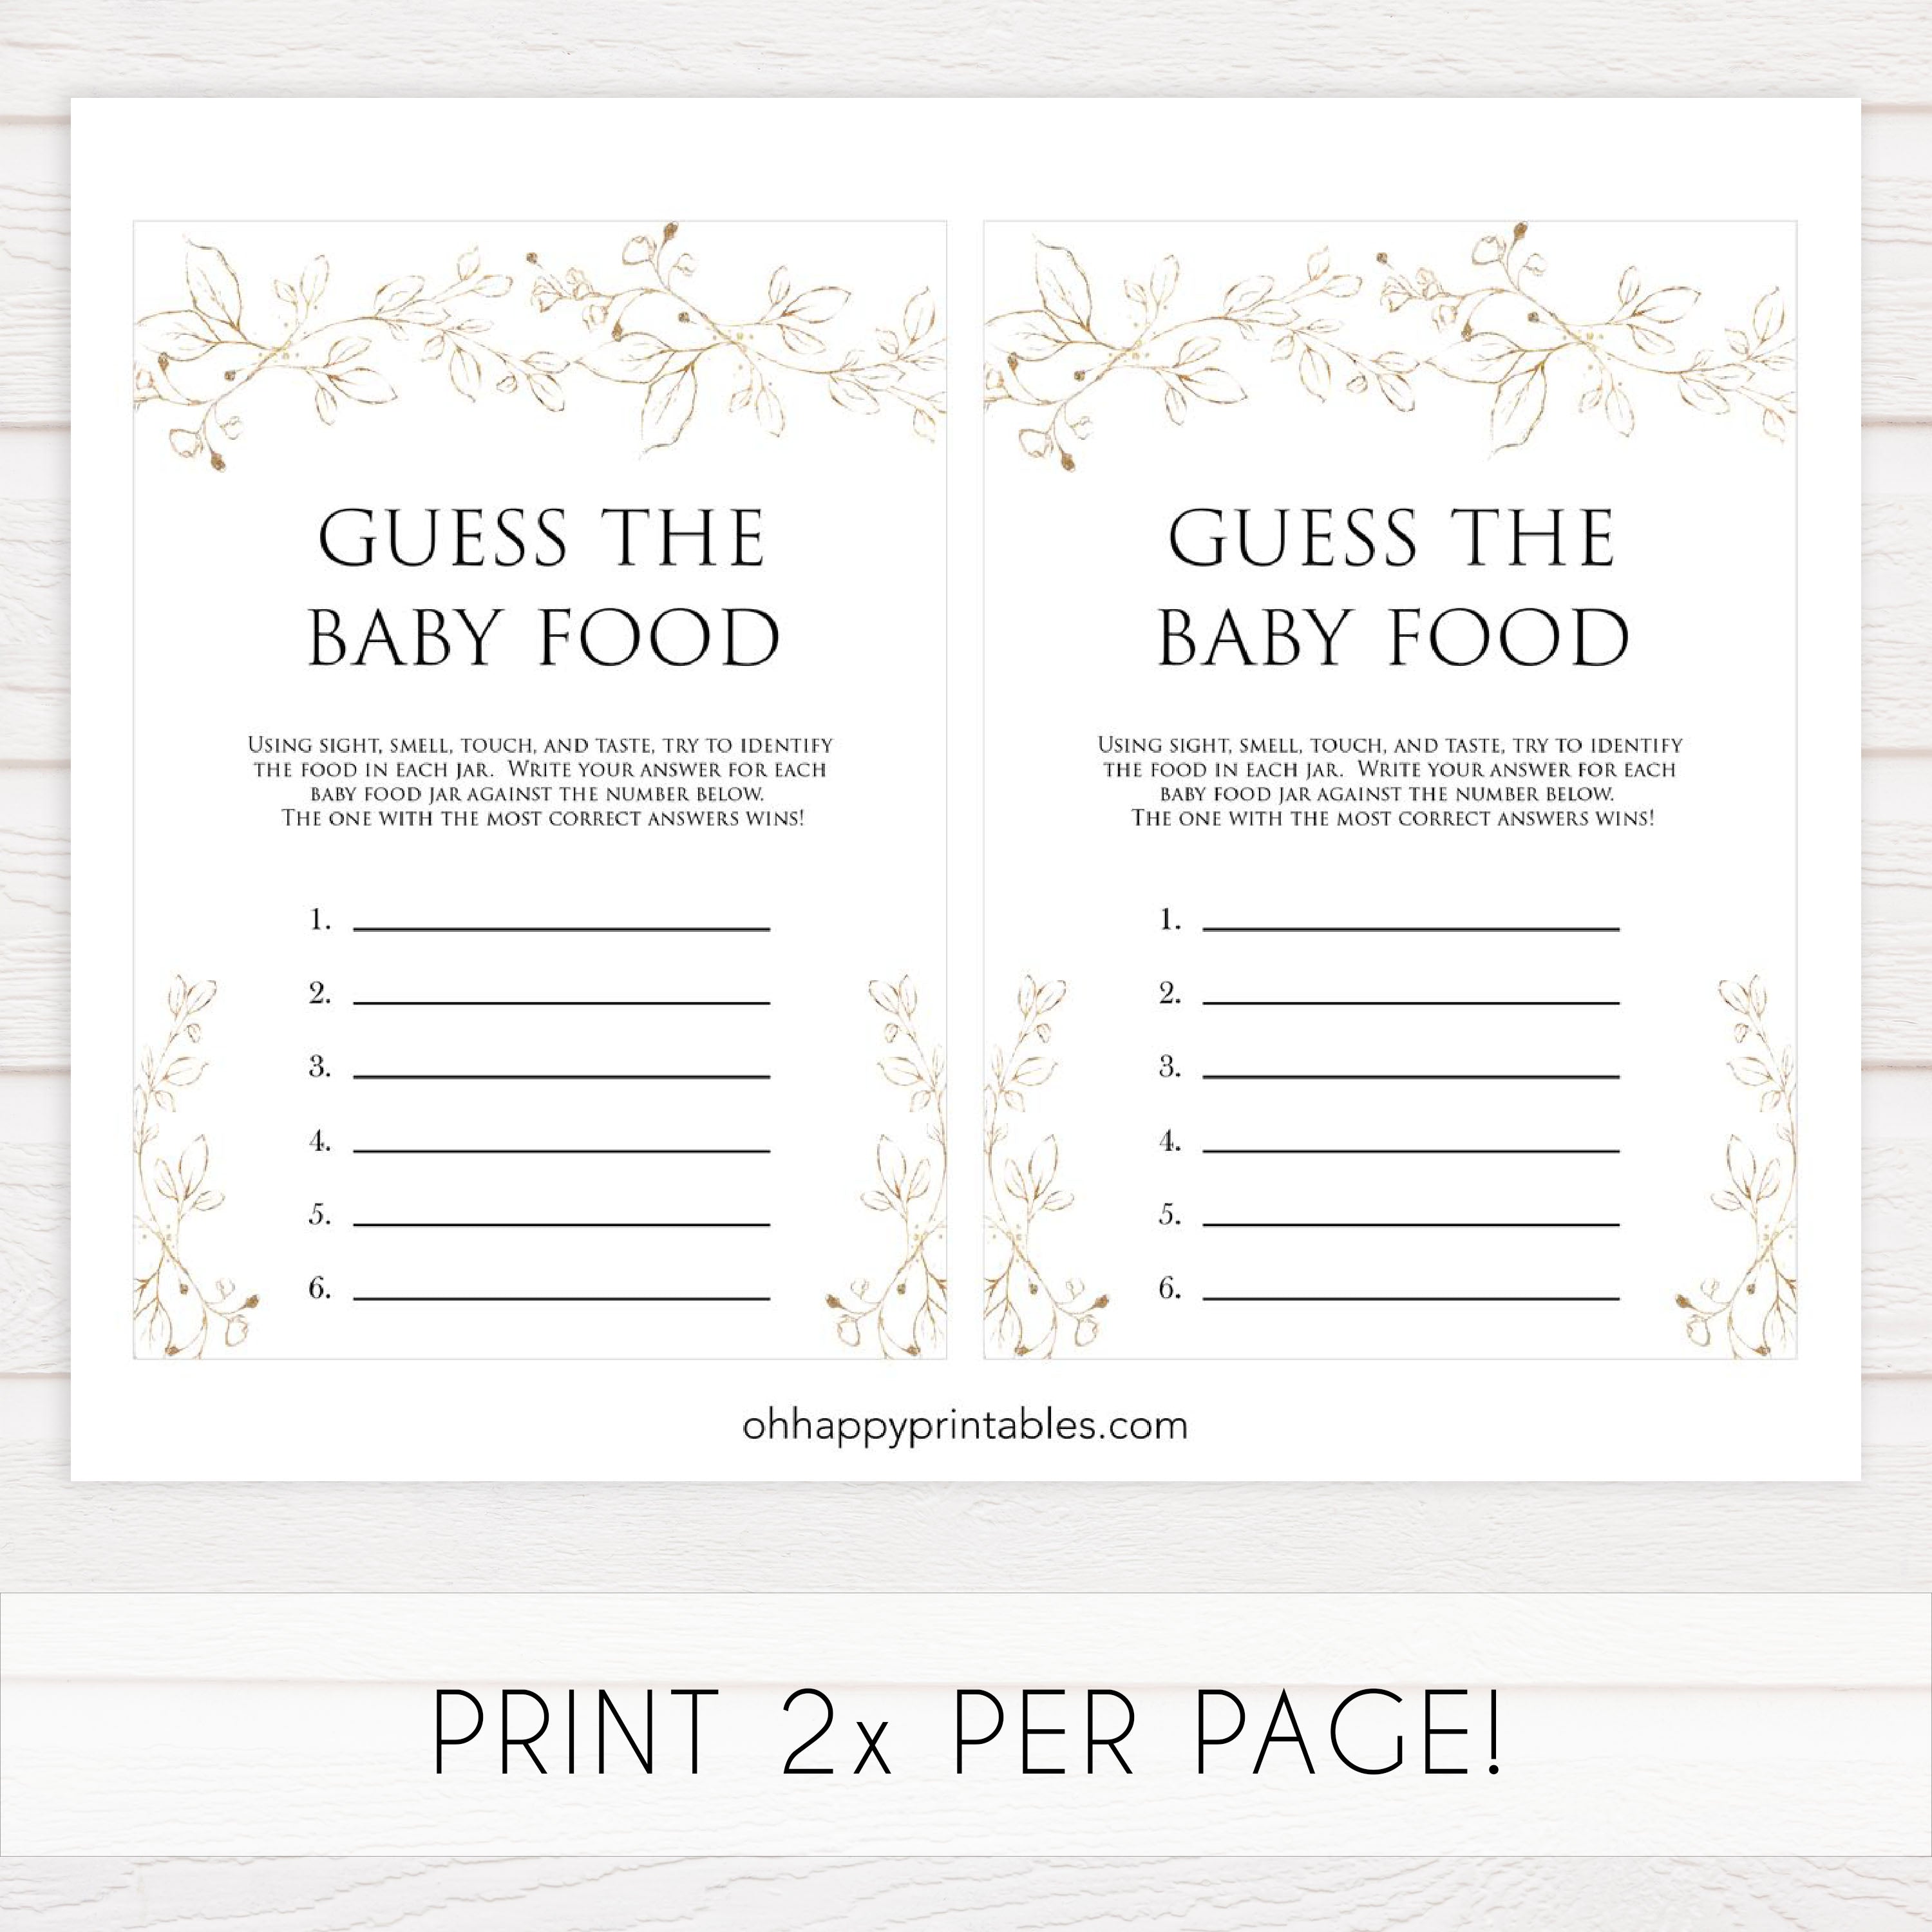 guess the baby food game, Printable baby shower games, gold leaf baby games, baby shower games, fun baby shower ideas, top baby shower ideas, gold leaf baby shower, baby shower games, fun gold leaf baby shower ideas